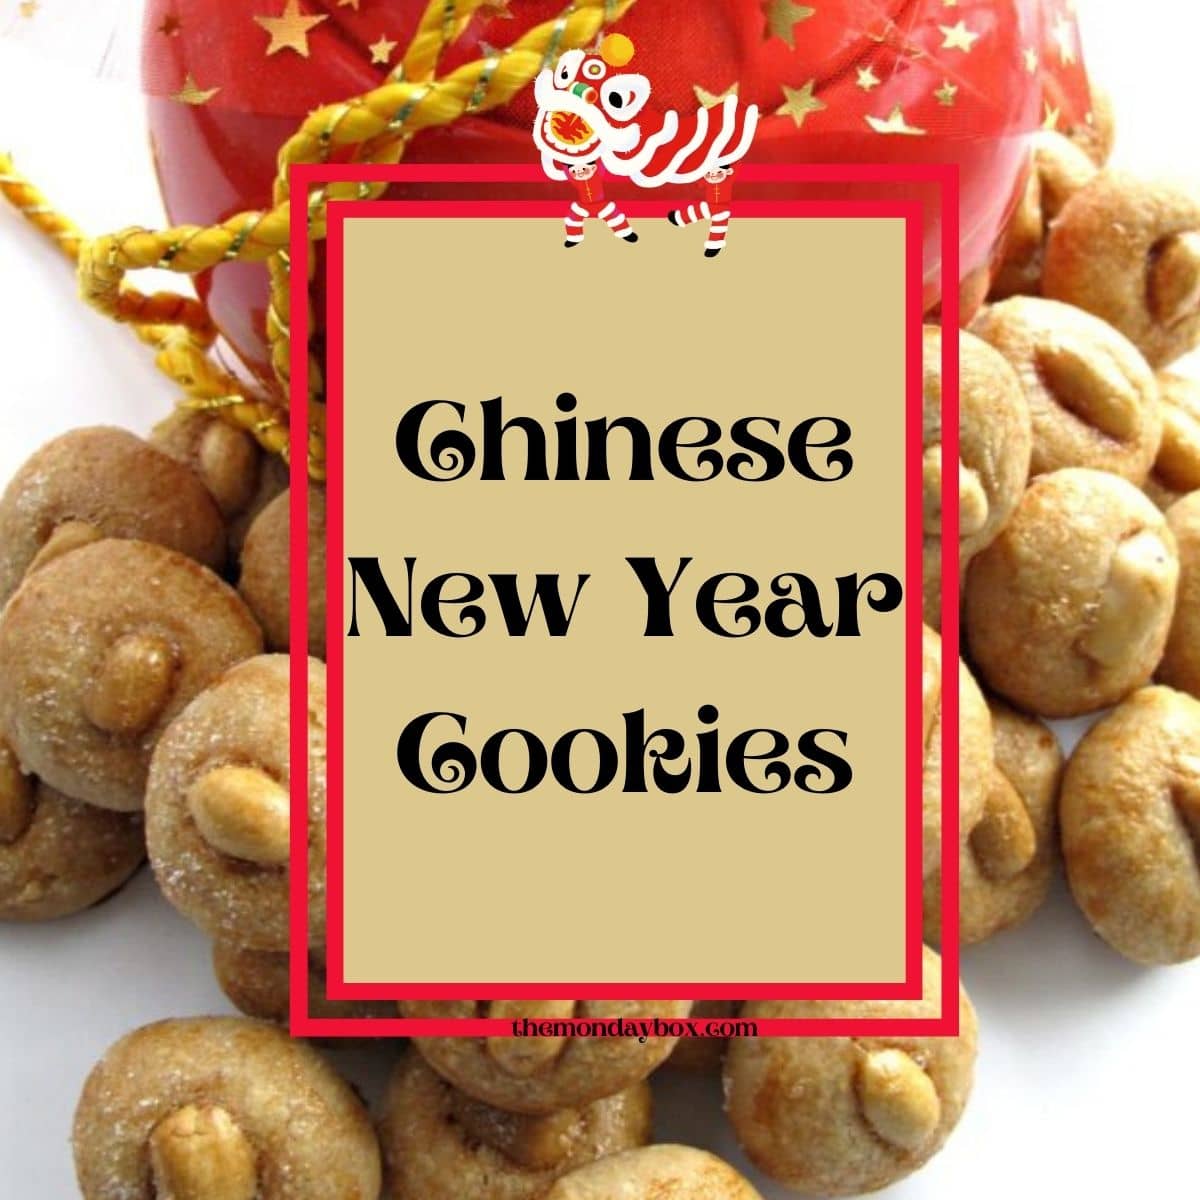 Background peanut cookies. Foreground text in box  "Chinese New Year Cookies".